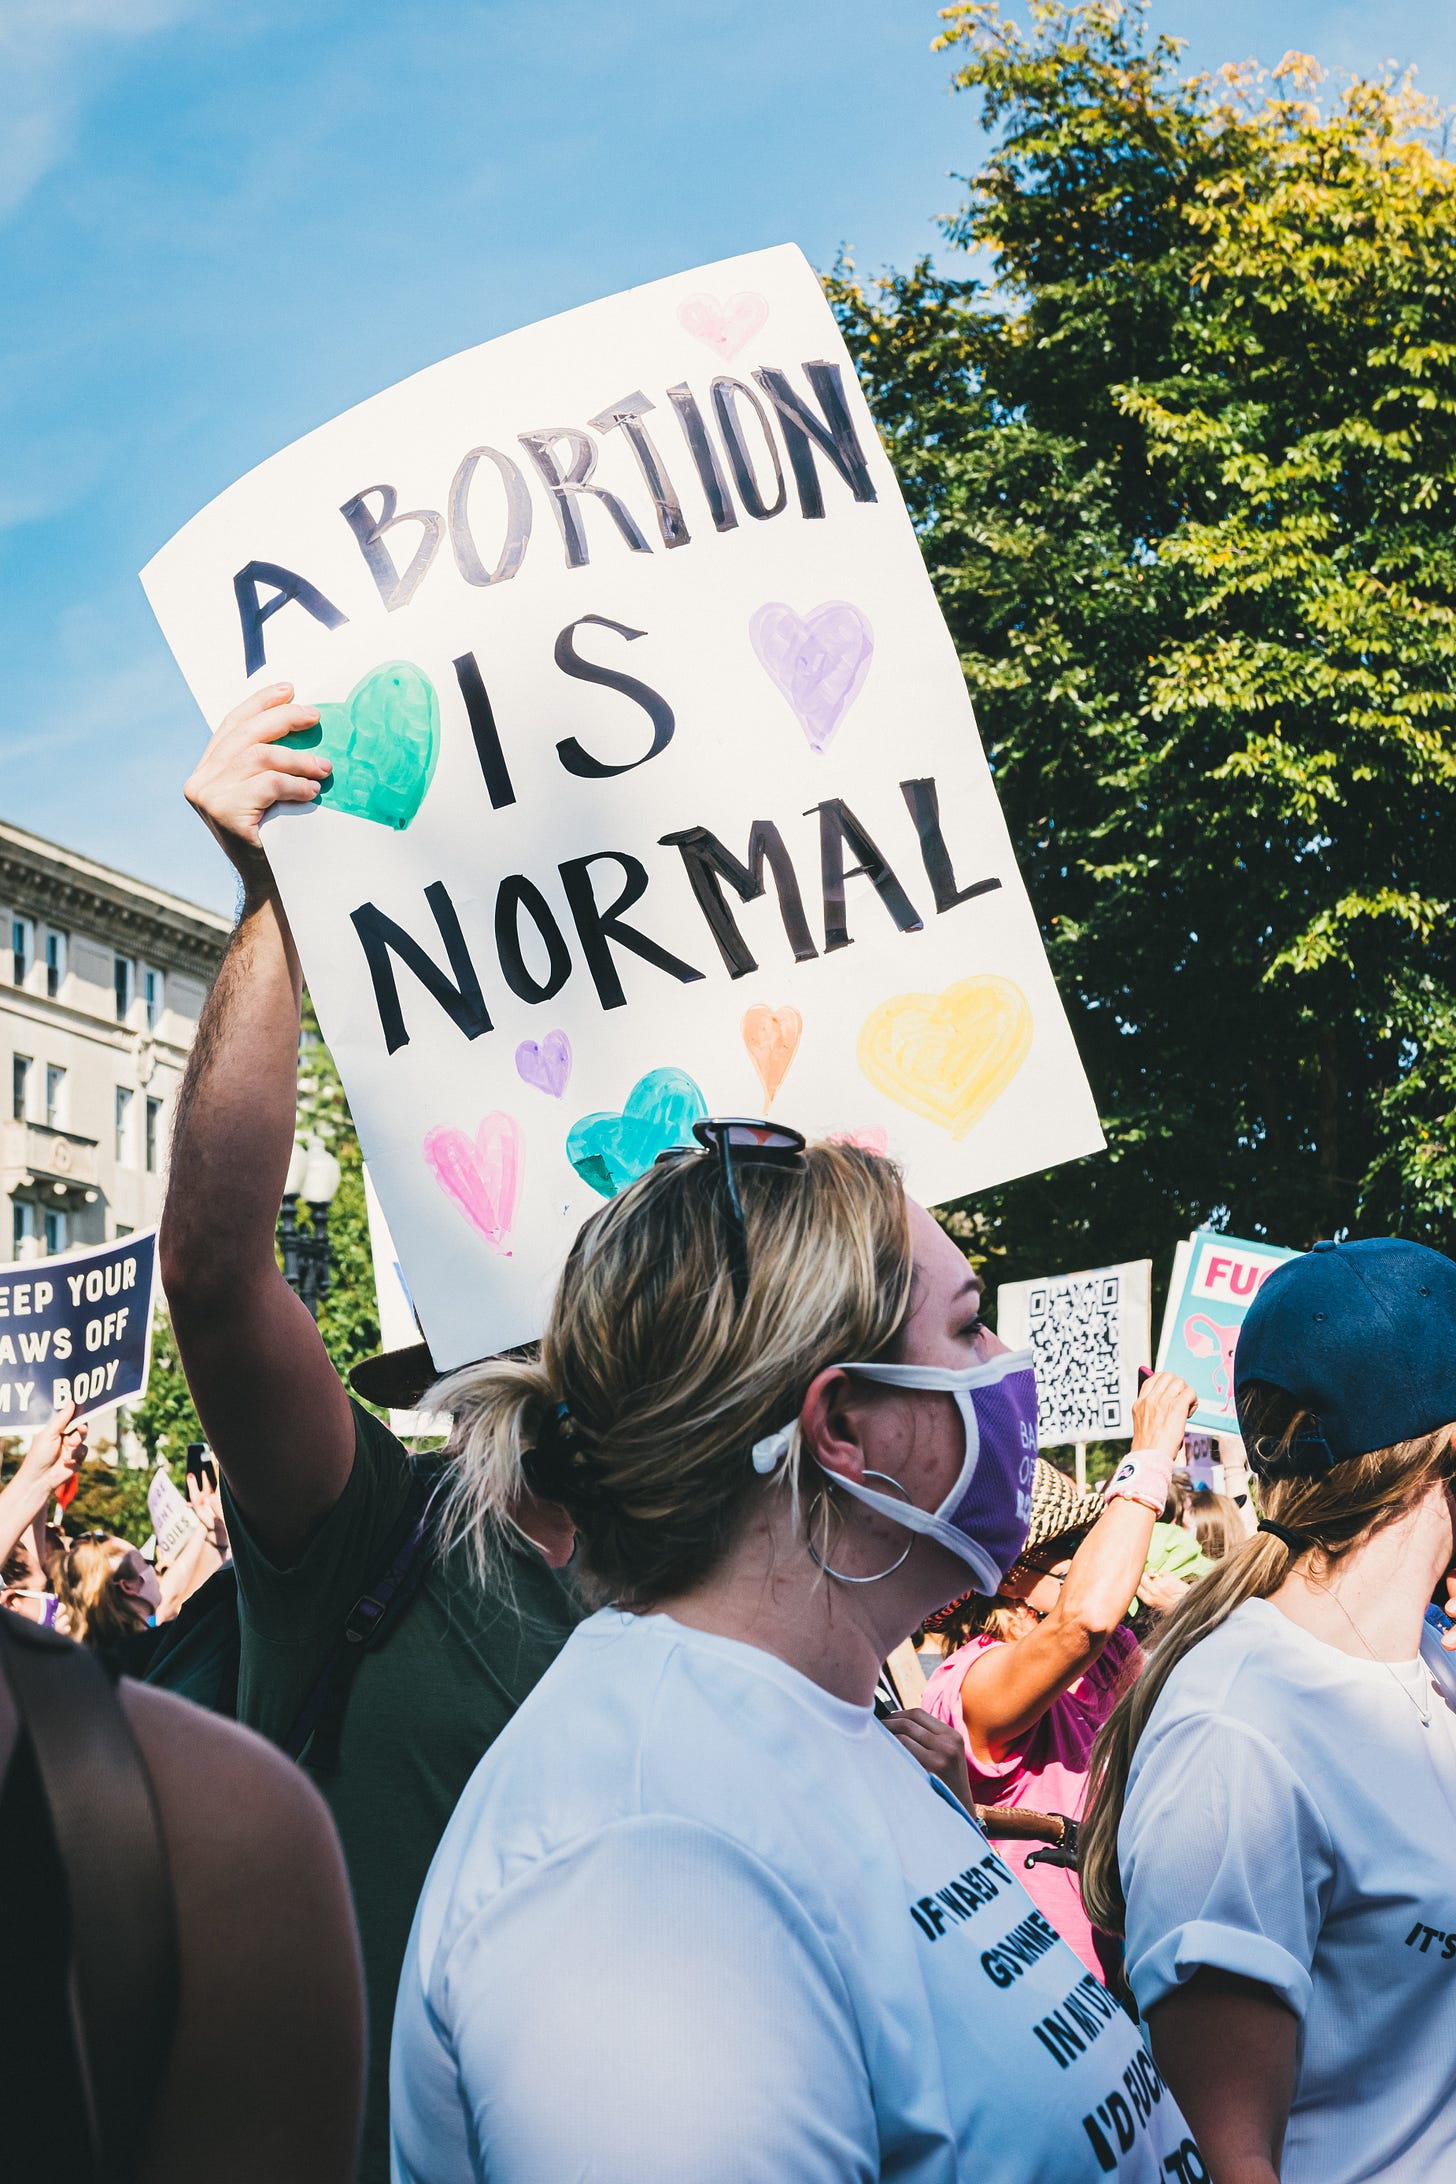 A close-up of a handwritten sign at an abortion rights protest in the US. The sign says ‘Abortion Is Normal.’